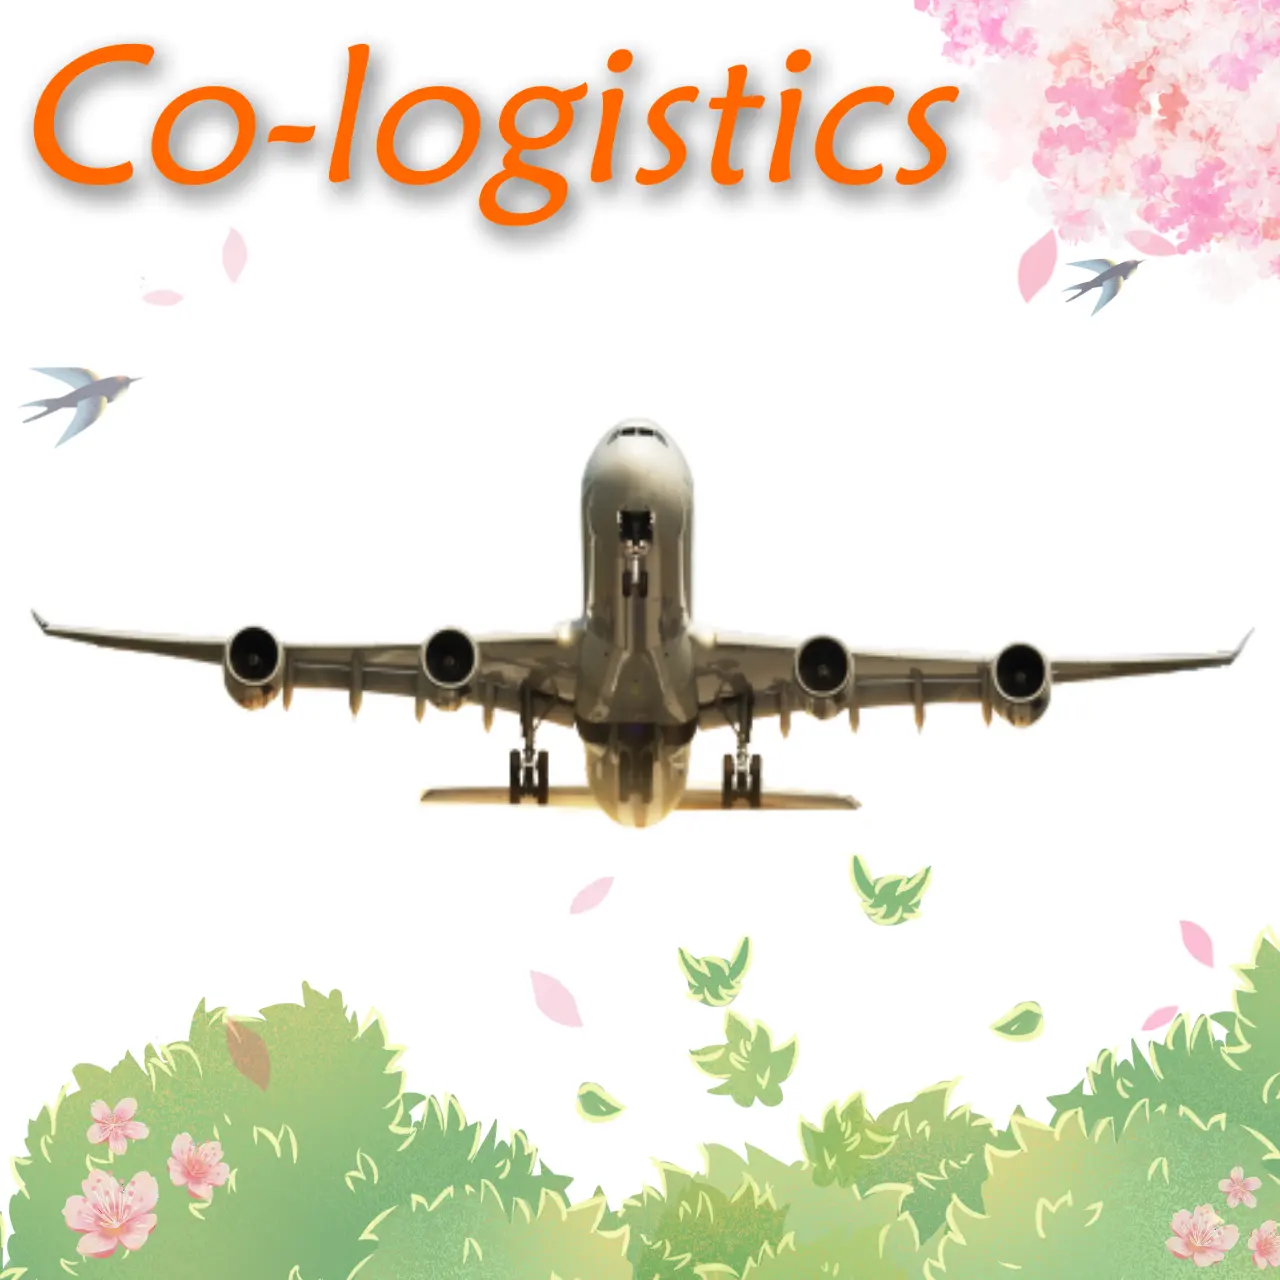 International Imports Cheap Air Freight Rates to UK taobao shipping agent freight forwarder